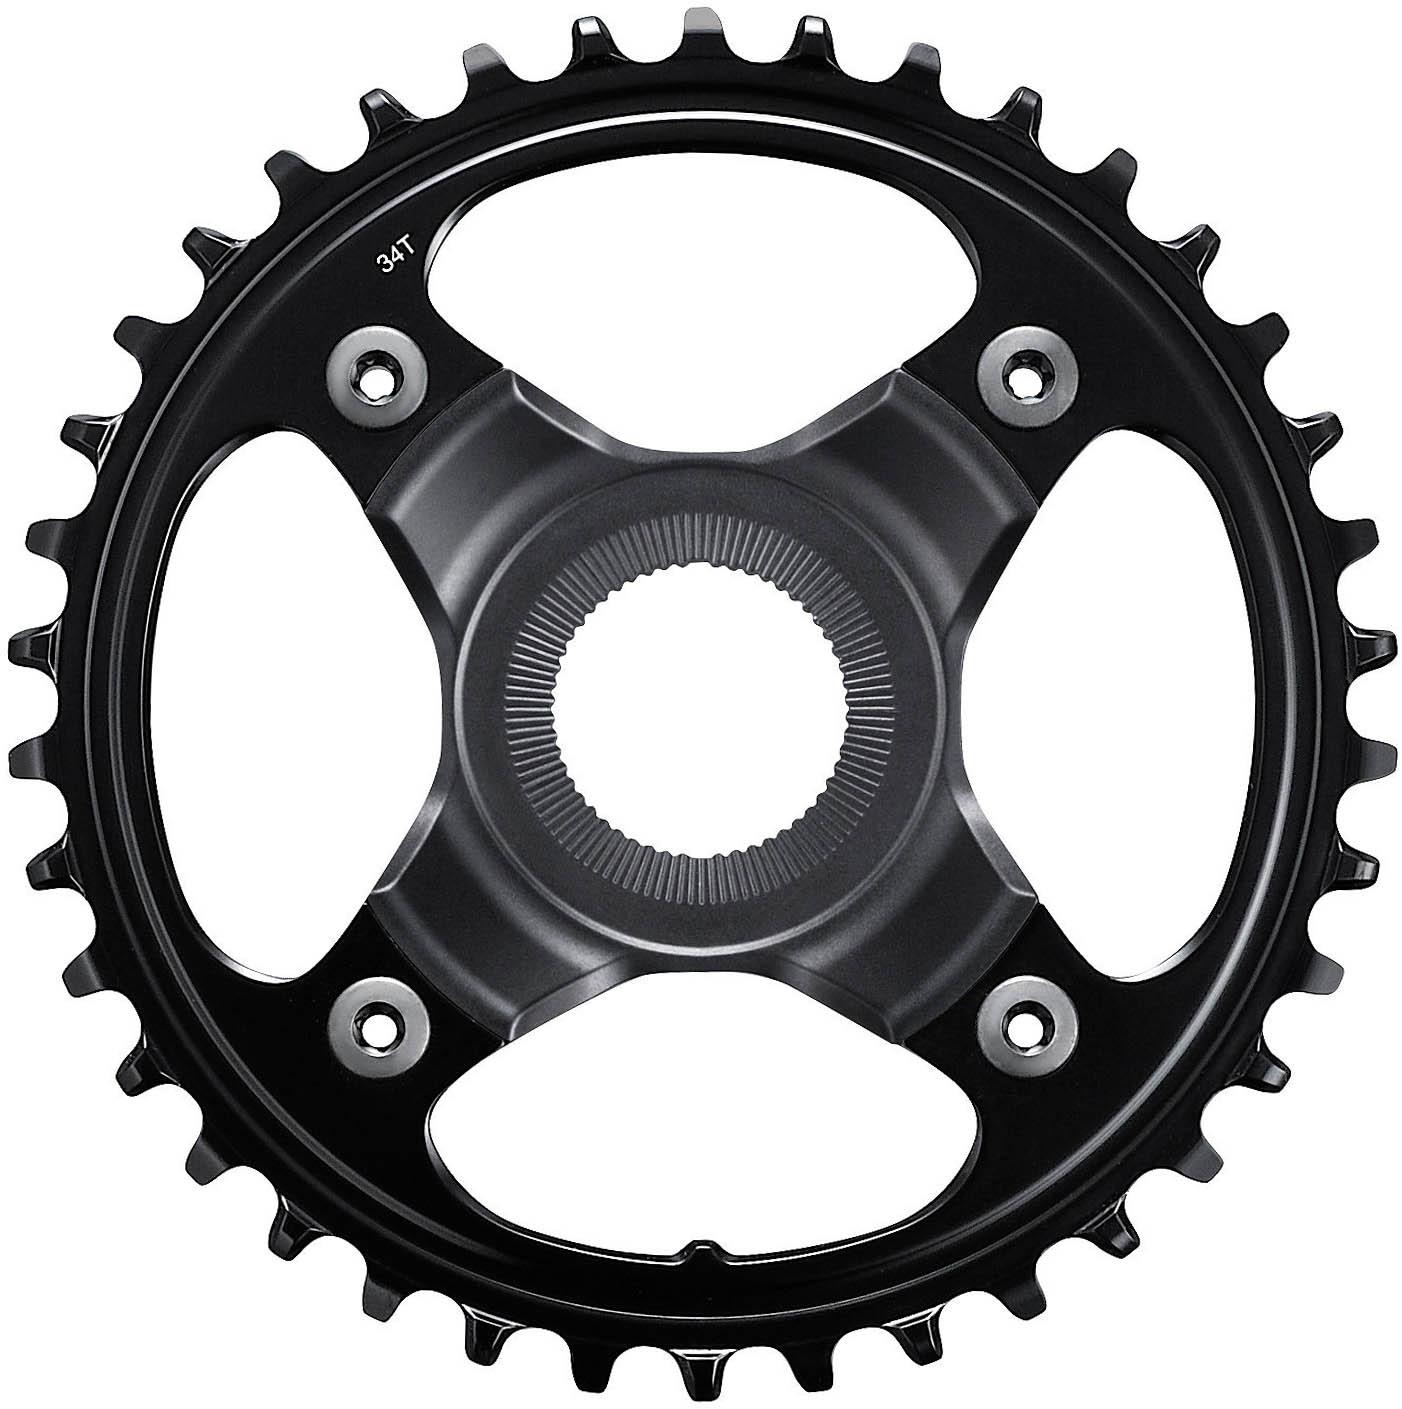 Shimano Steps Sm-cre80-12 Chainring - 1x12-speed - Black